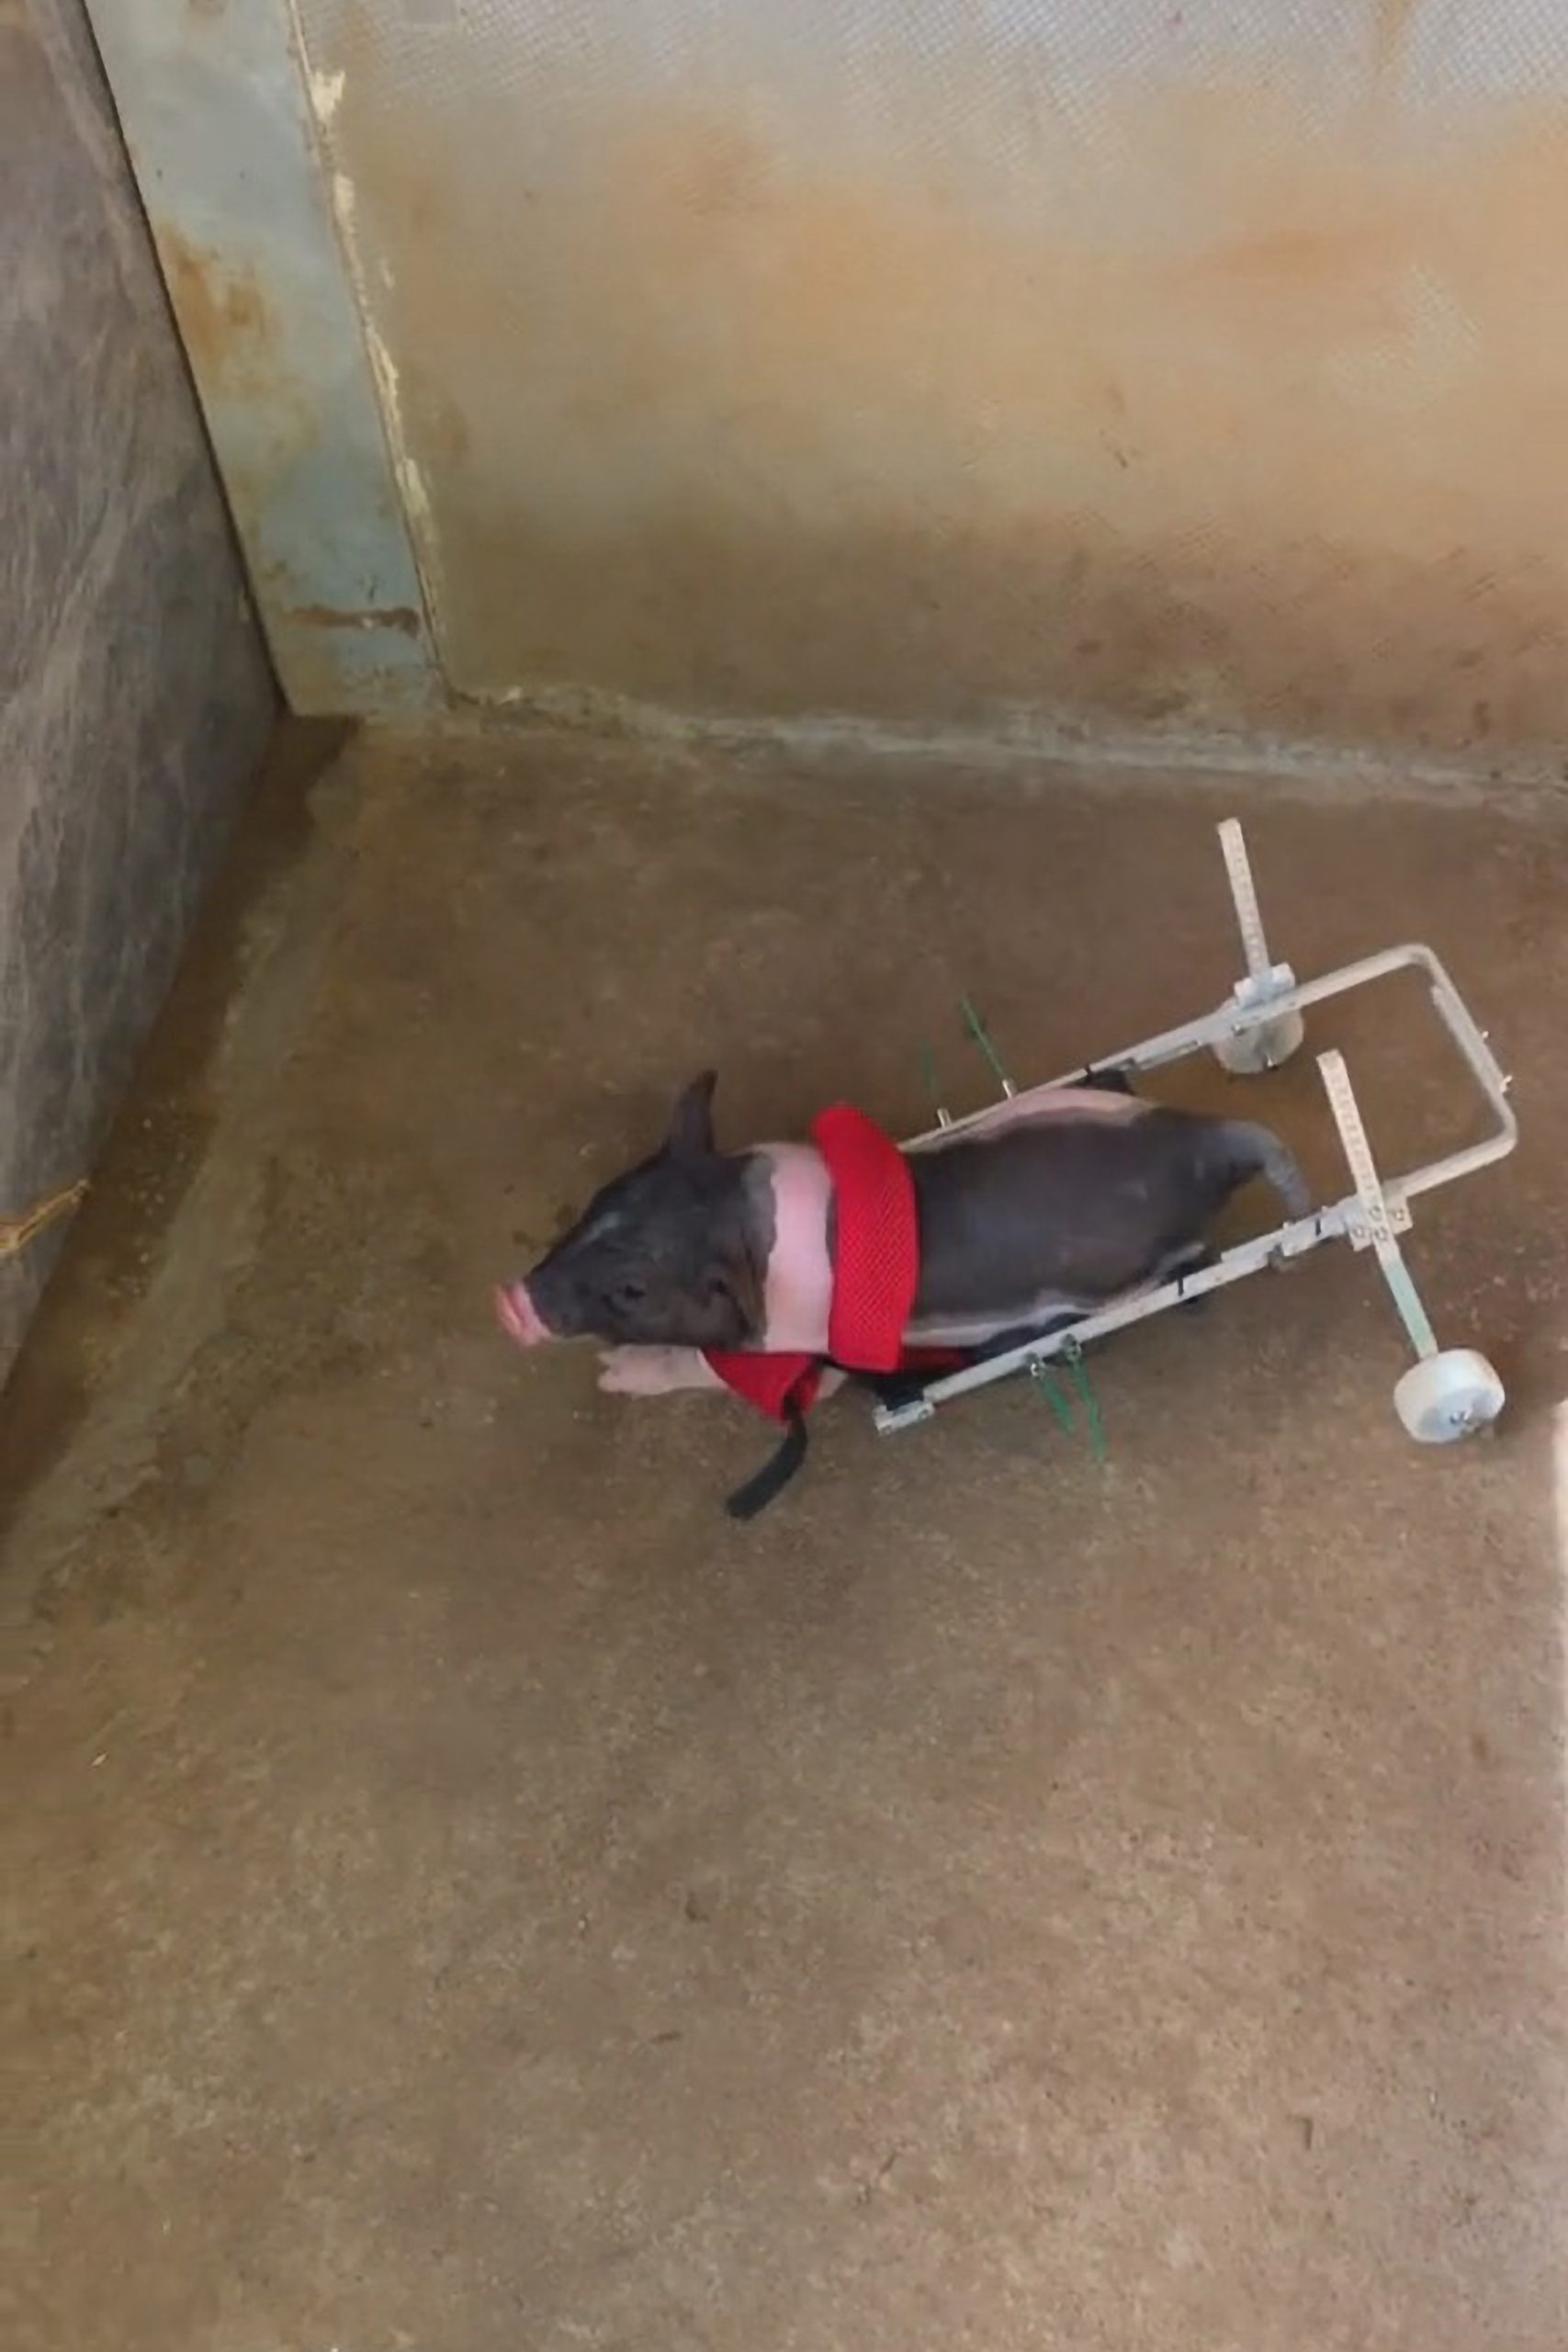 Read more about the article Piglet Born Without Hind Legs Kept As Pet And Fitted With Device With Wheels So It Can Get Around